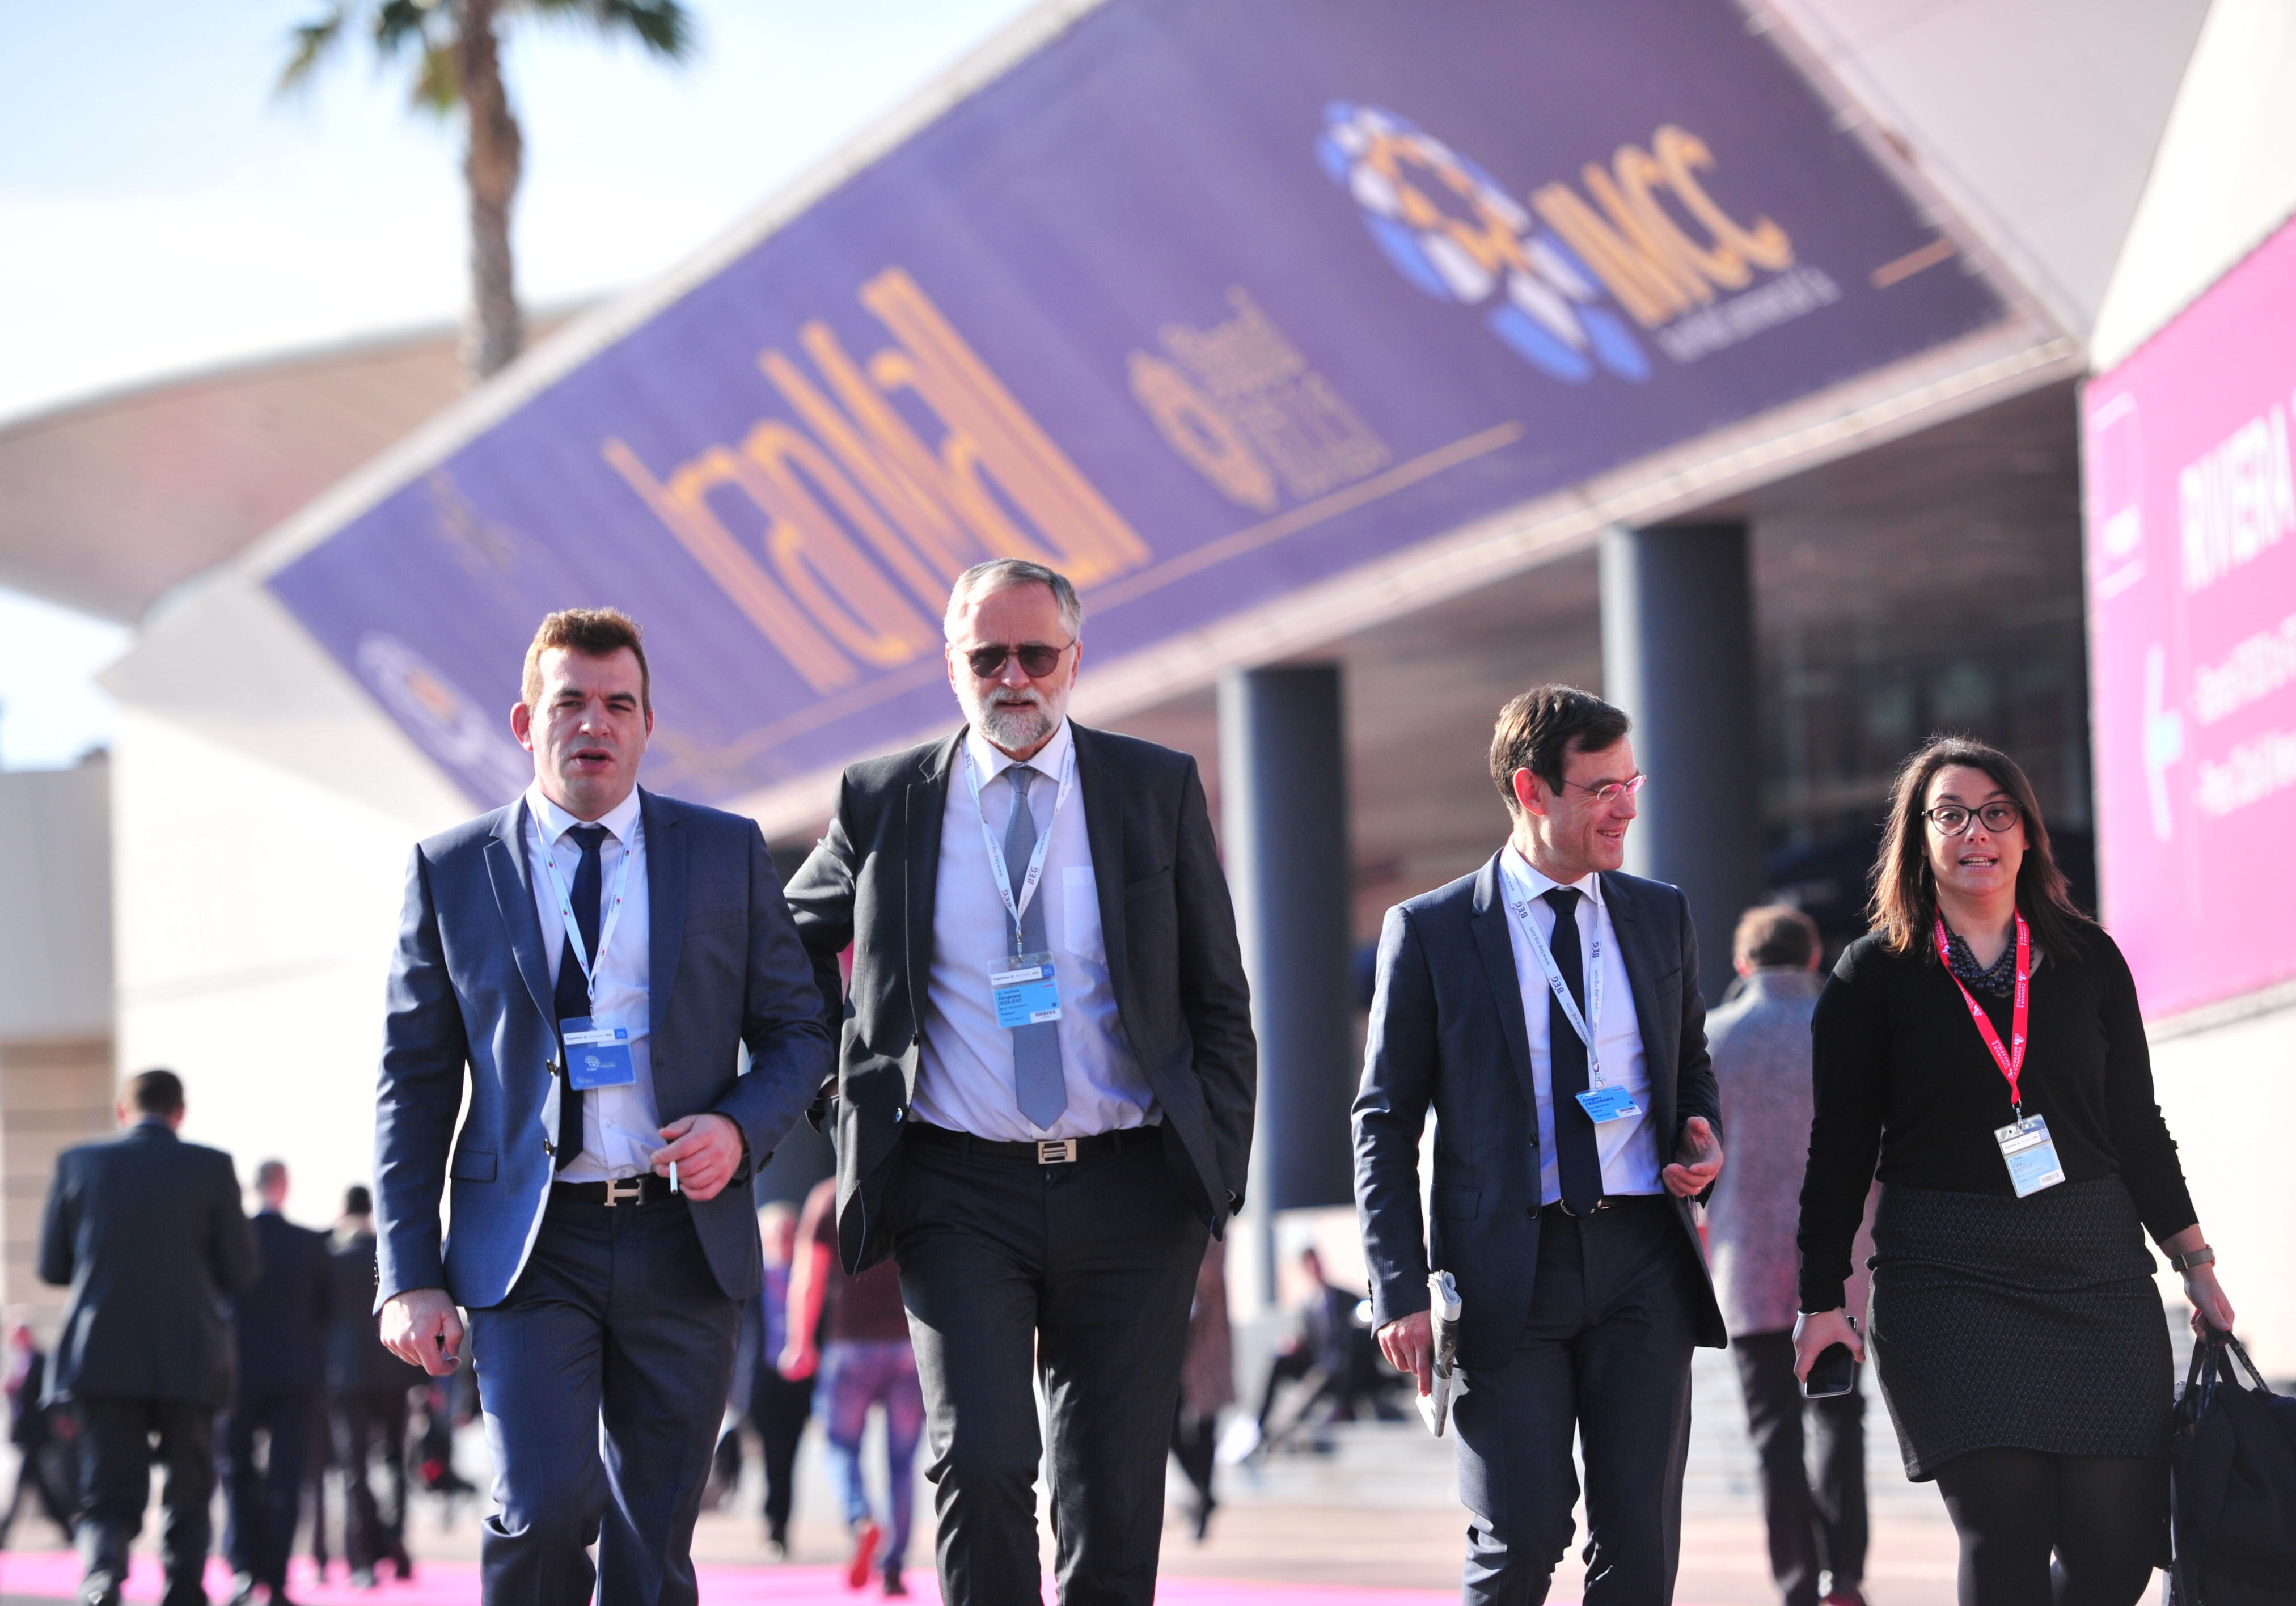 MAPIC 2016 - ATMOSPHERE - OUTSIDE - VISITORS